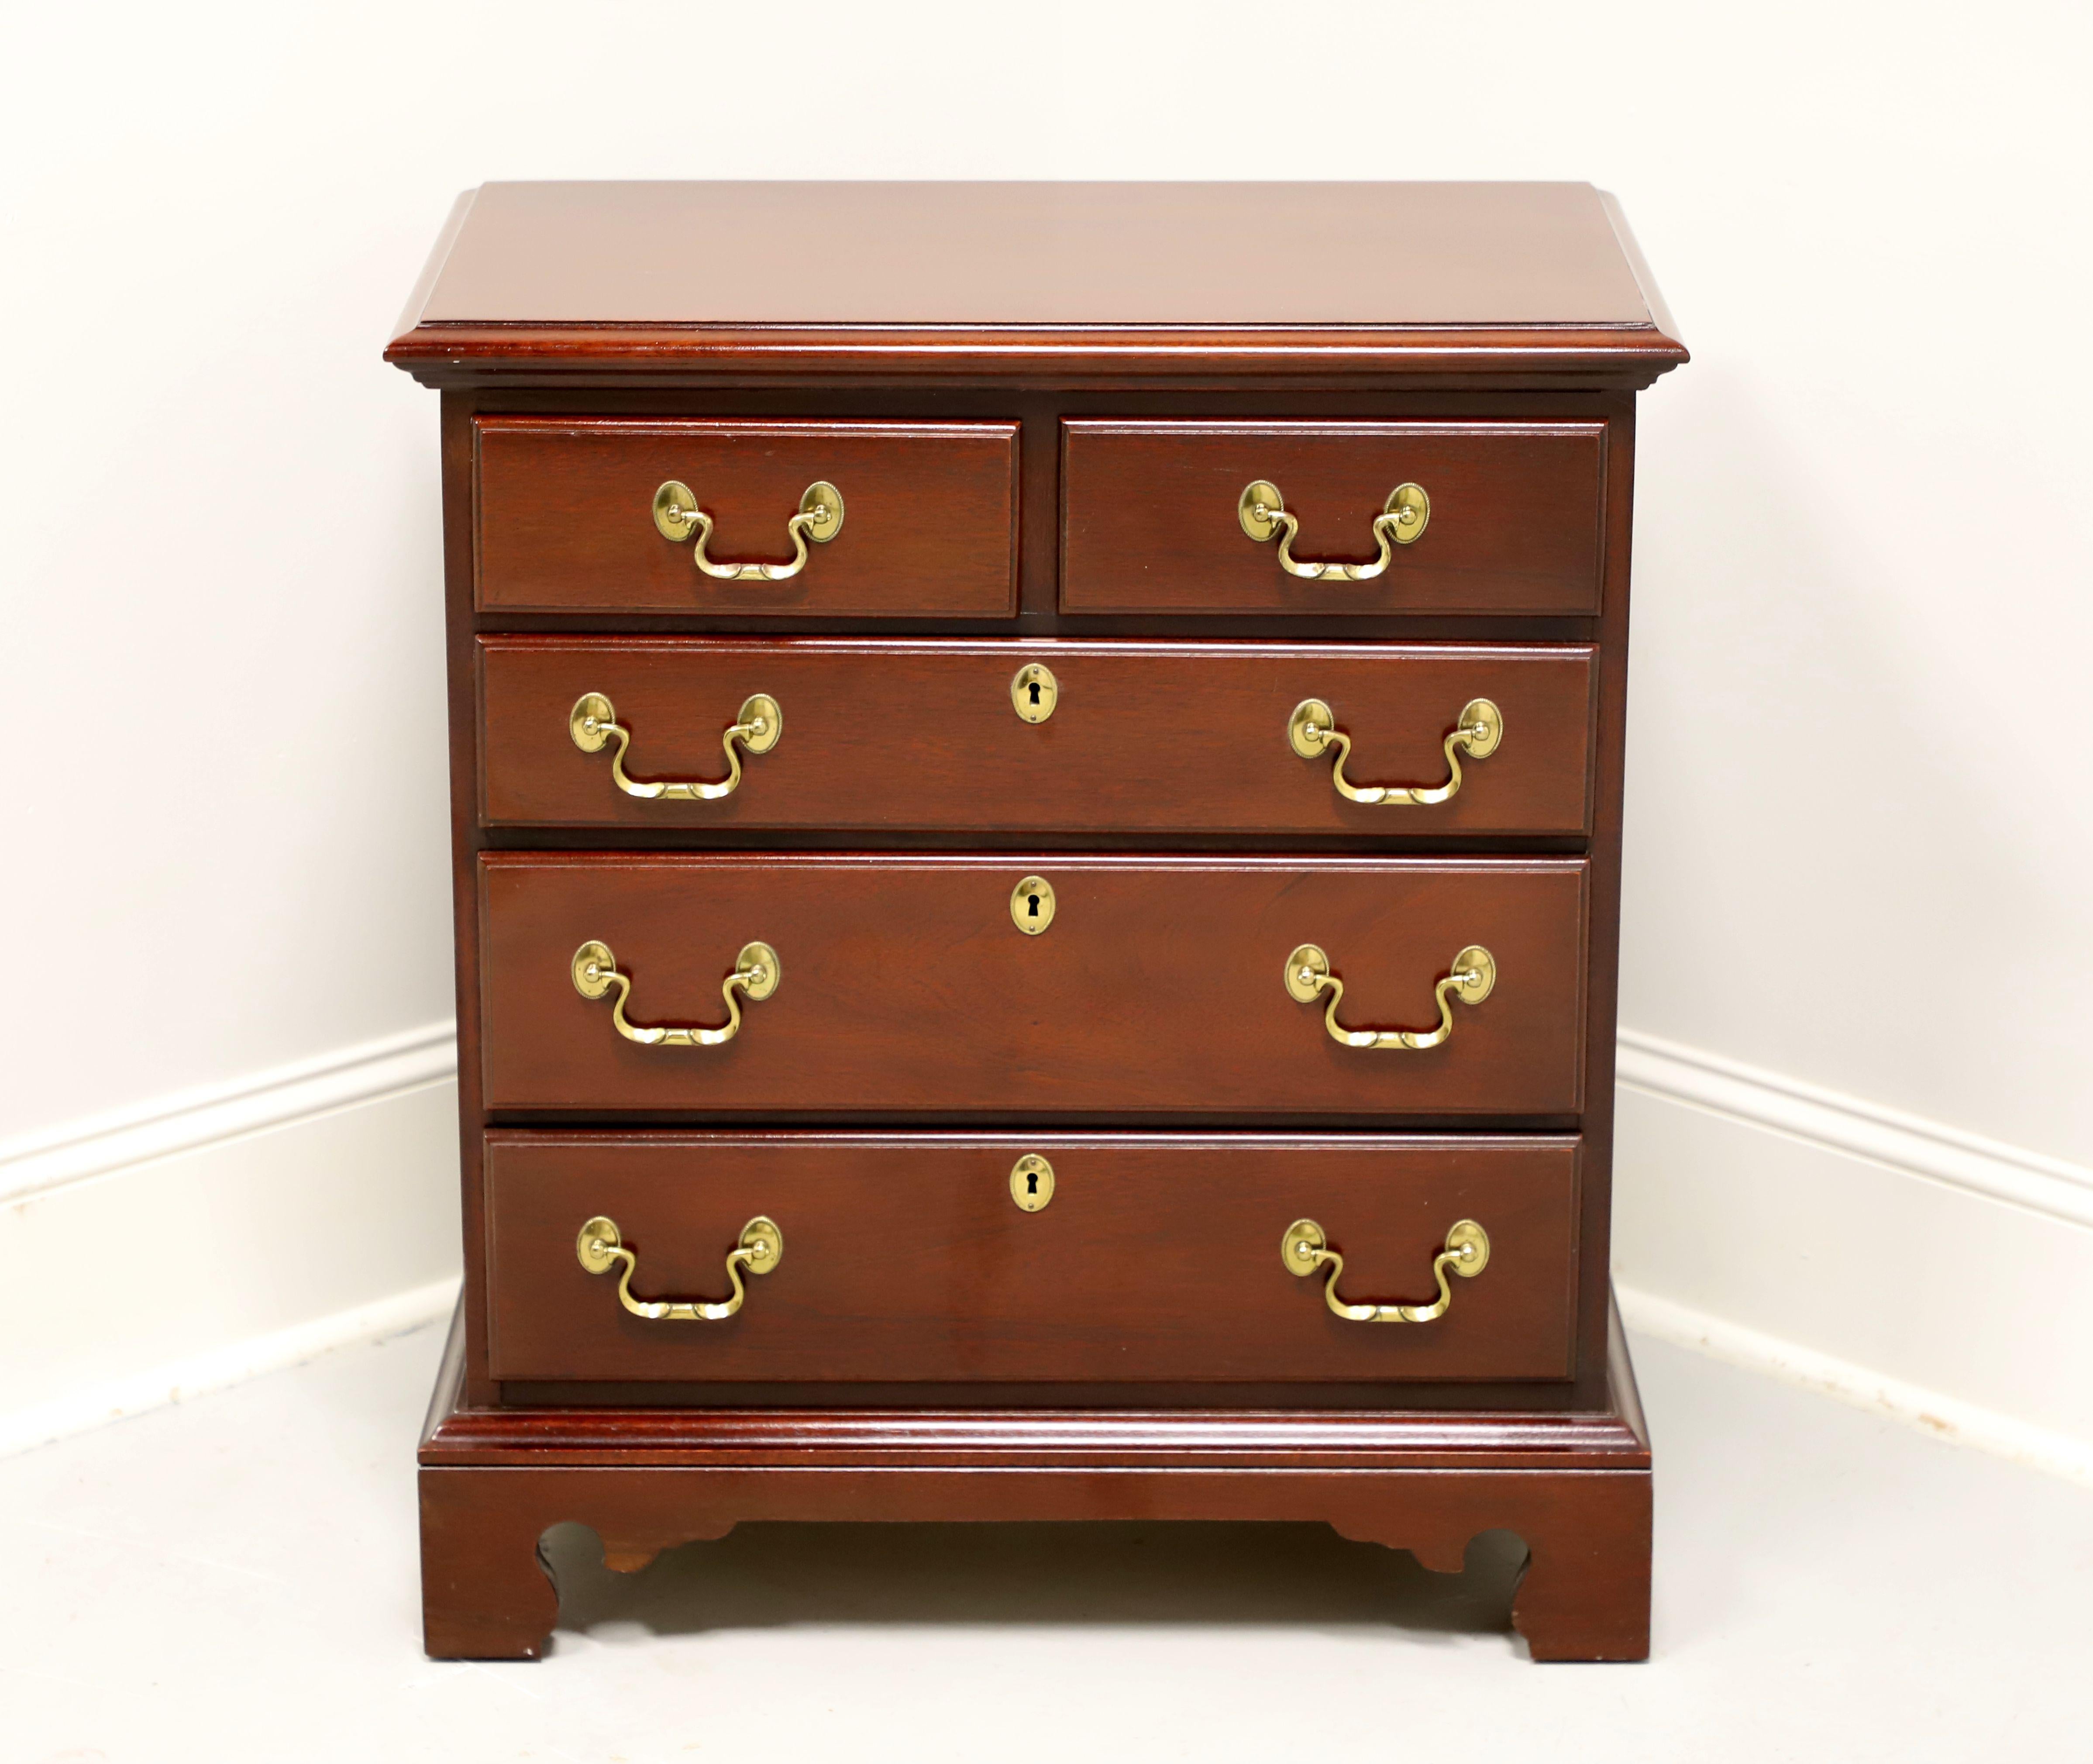 A Chippendale style bedside chest by Link-Taylor, from their Heirloom Gallery, the Planters. Solid mahogany with brass hardware, ogee edge to the top, side handles, and bracket feet. Two over three drawers of dovetail construction, with three lower